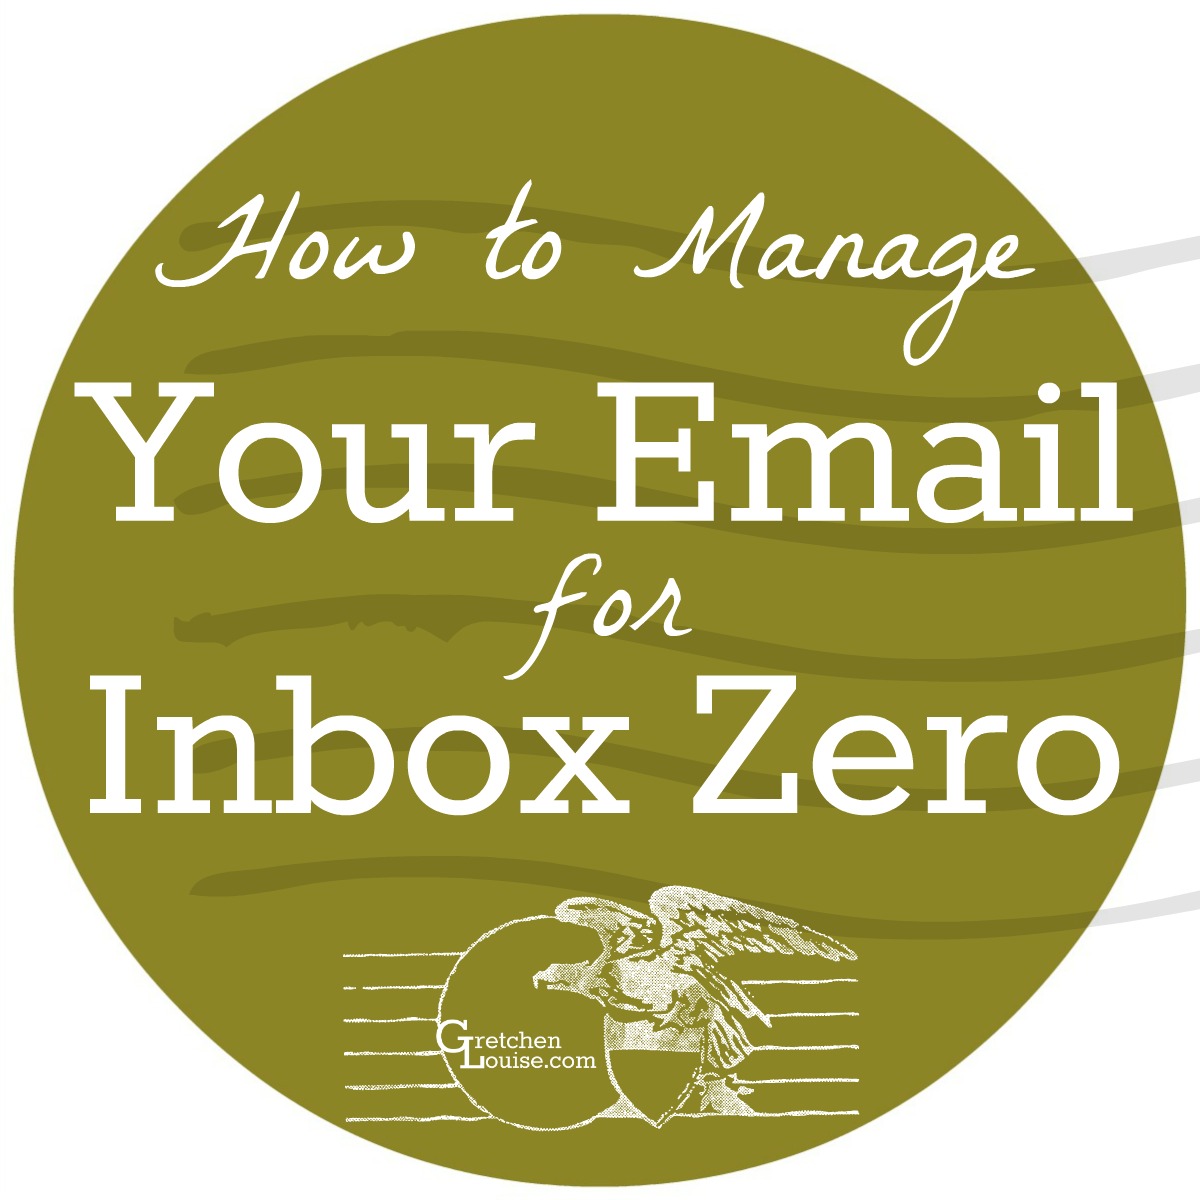 How to Manage Your Email for Inbox Zero